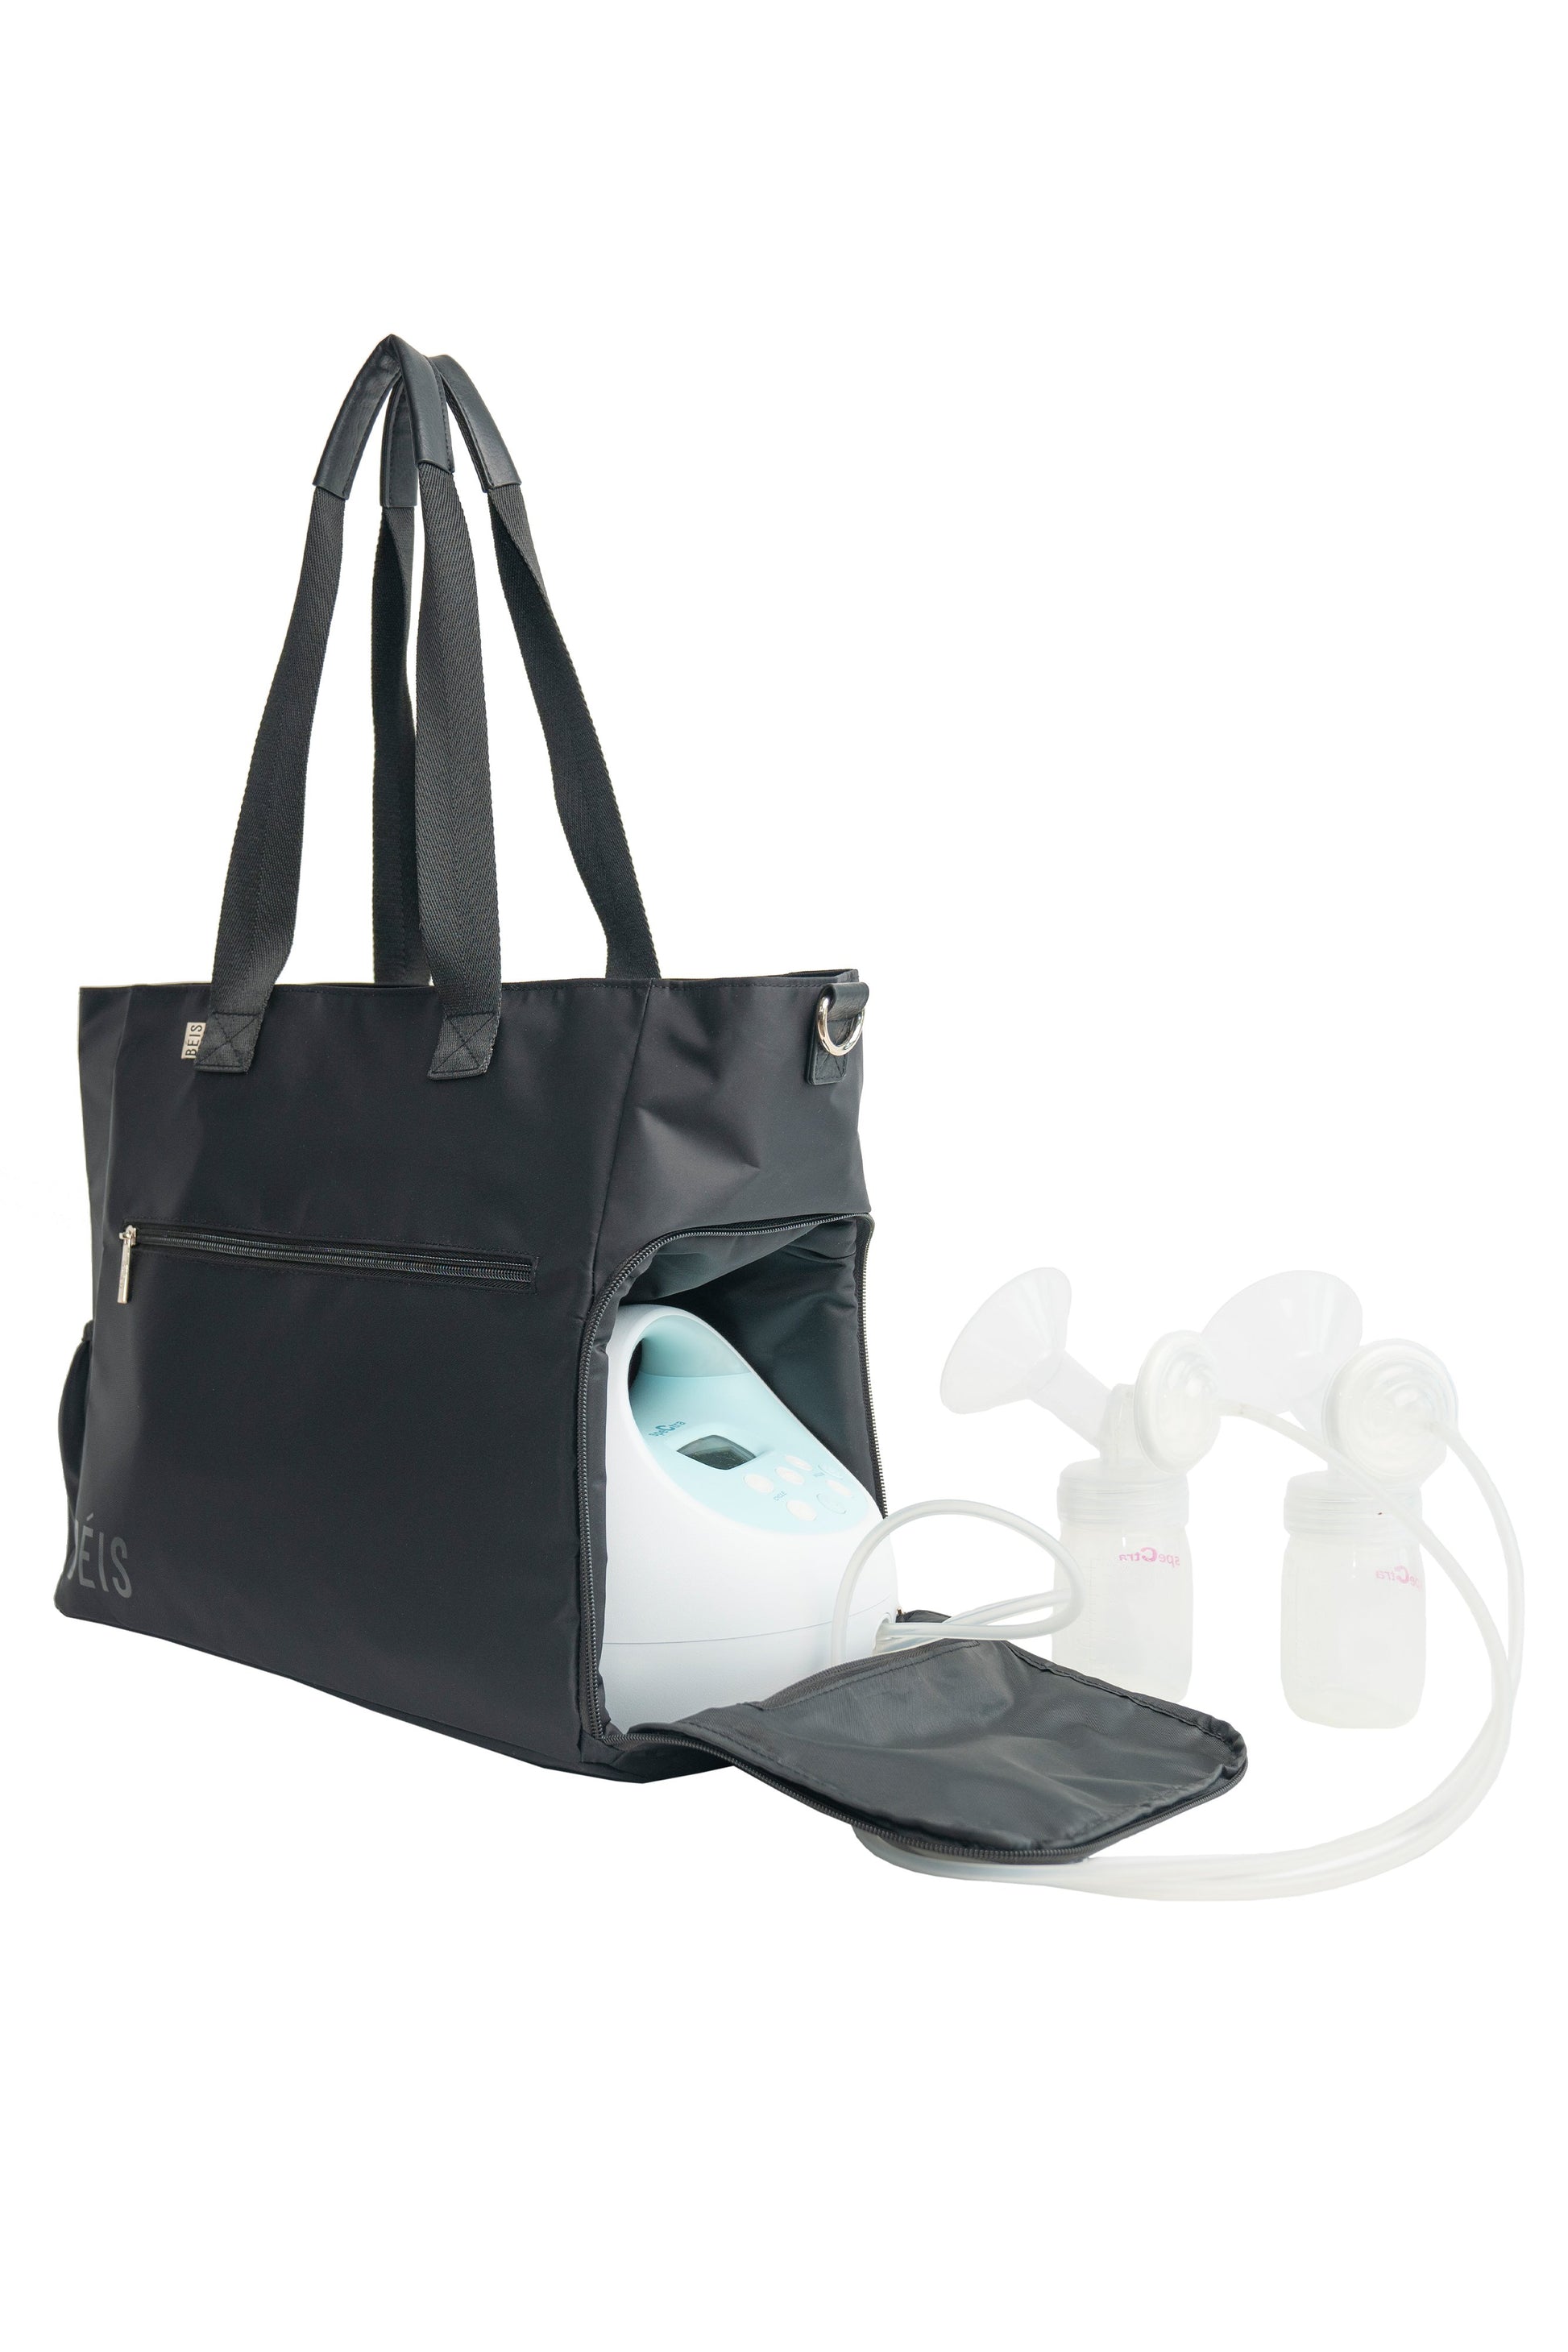 Pumping Bag Black Open Side Pouch with Pump Inside and Breast Pumps